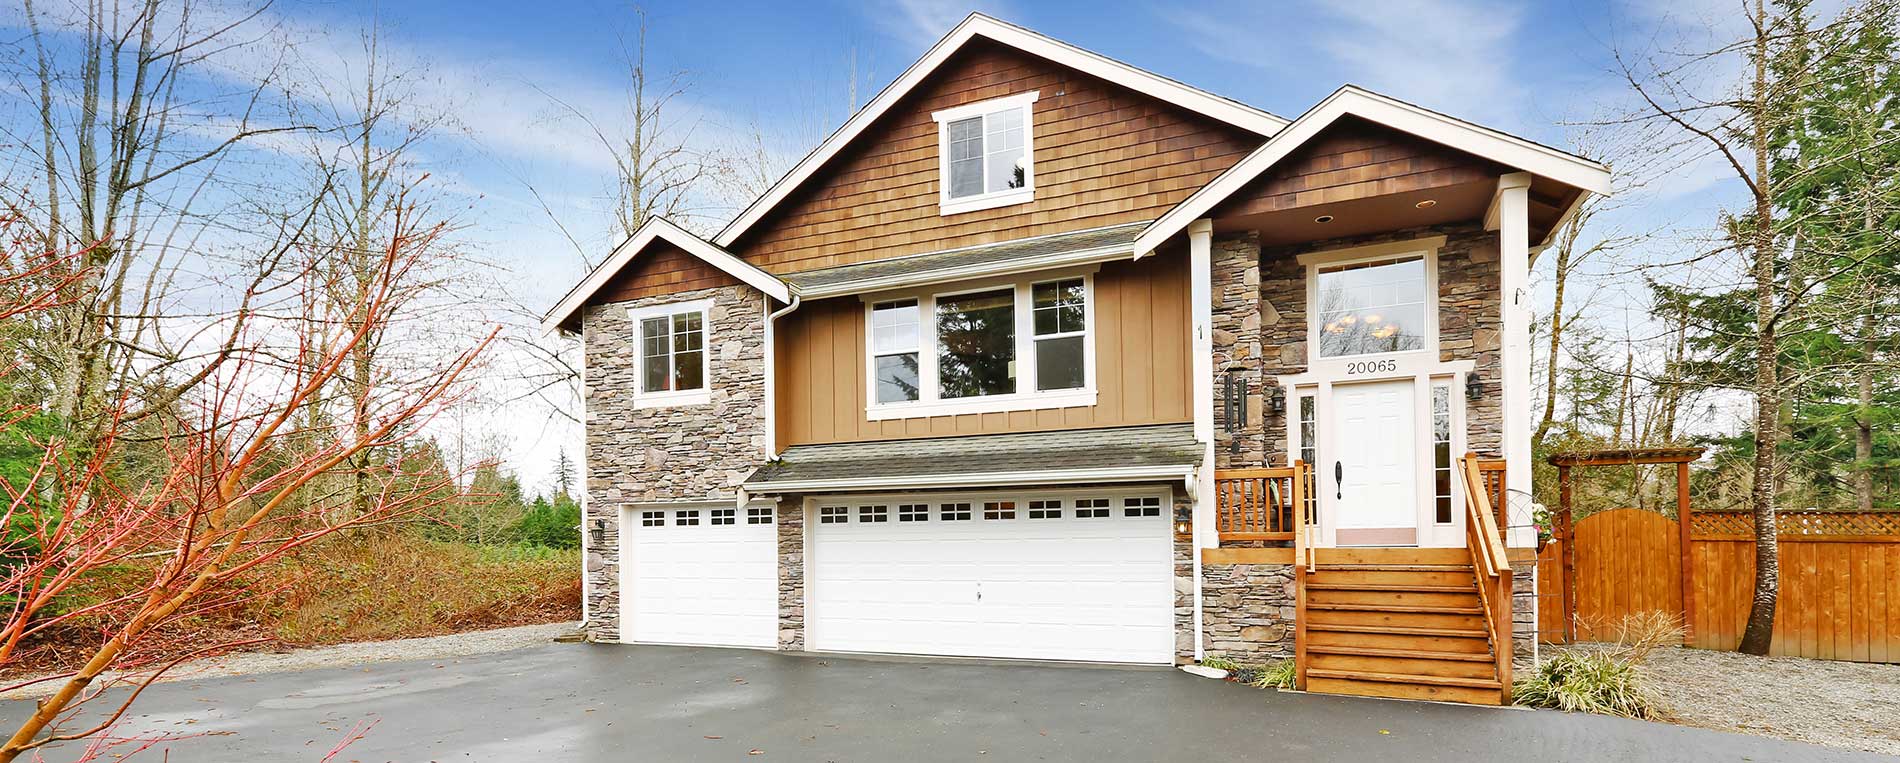 Why Your Garage Door Is Not Closing Properly